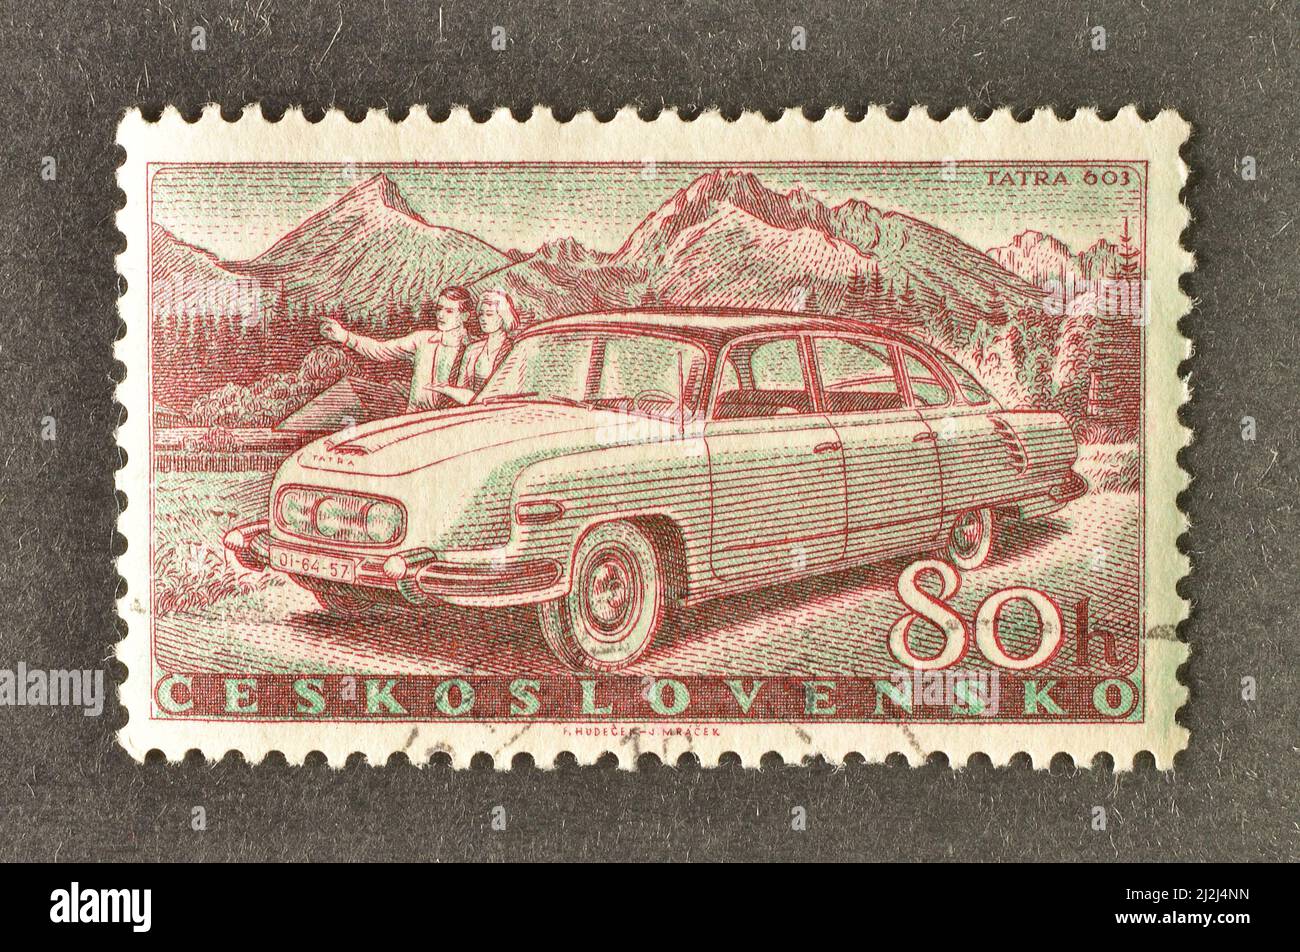 Cancelled postage stamp printed by Czechoslovakia, that shows Tatra 603 car, circa 1958. Stock Photo